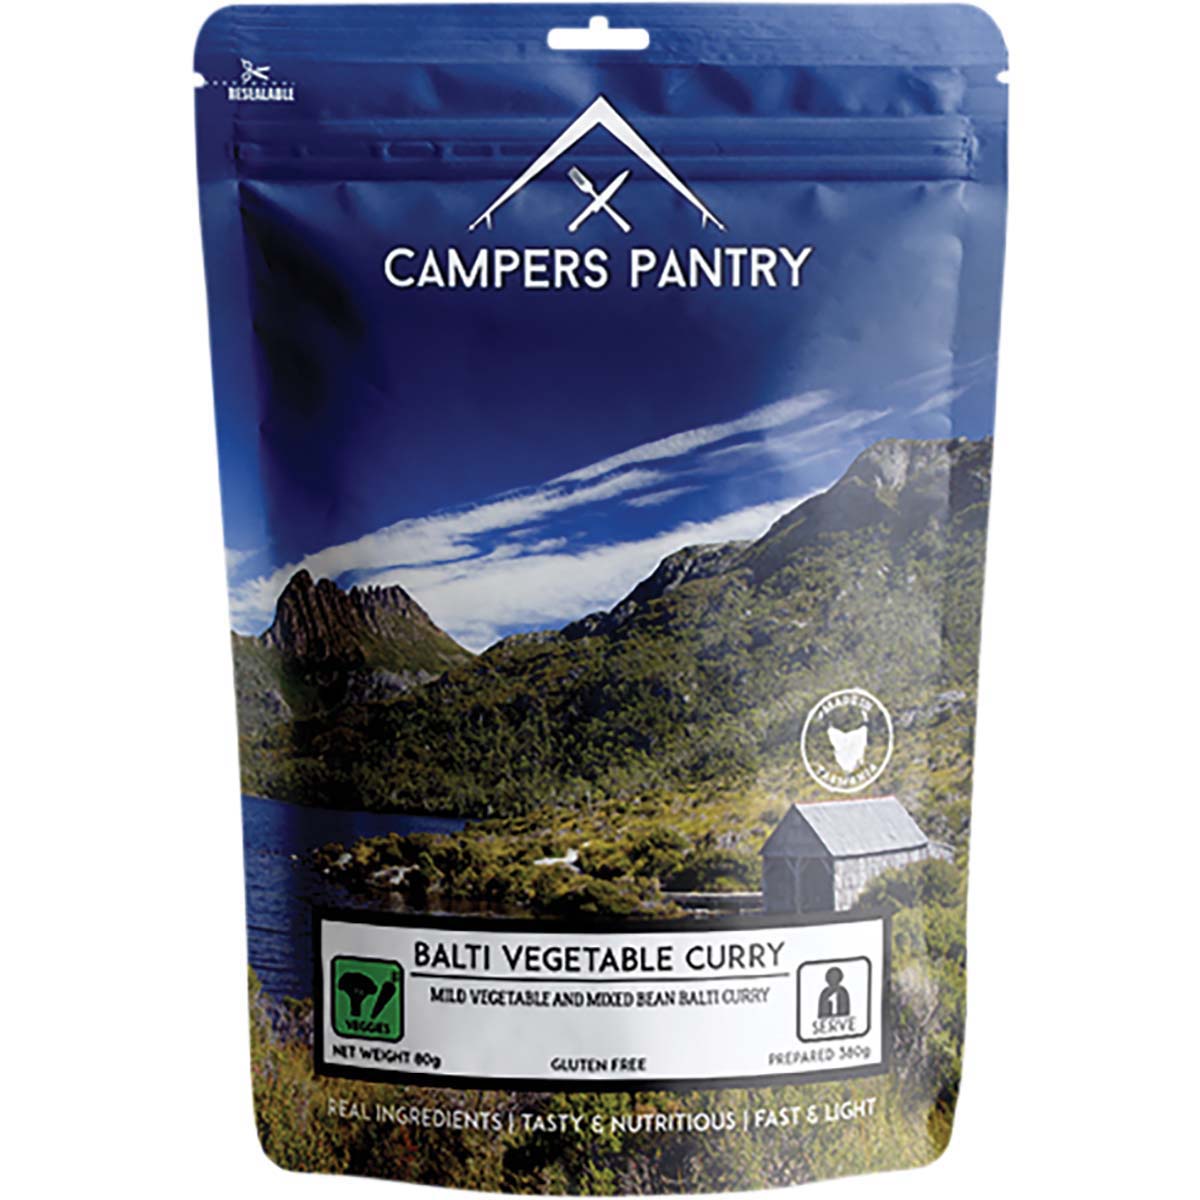 Campers Pantry Freeze Dried Balti Vegetable Curry Single Serve